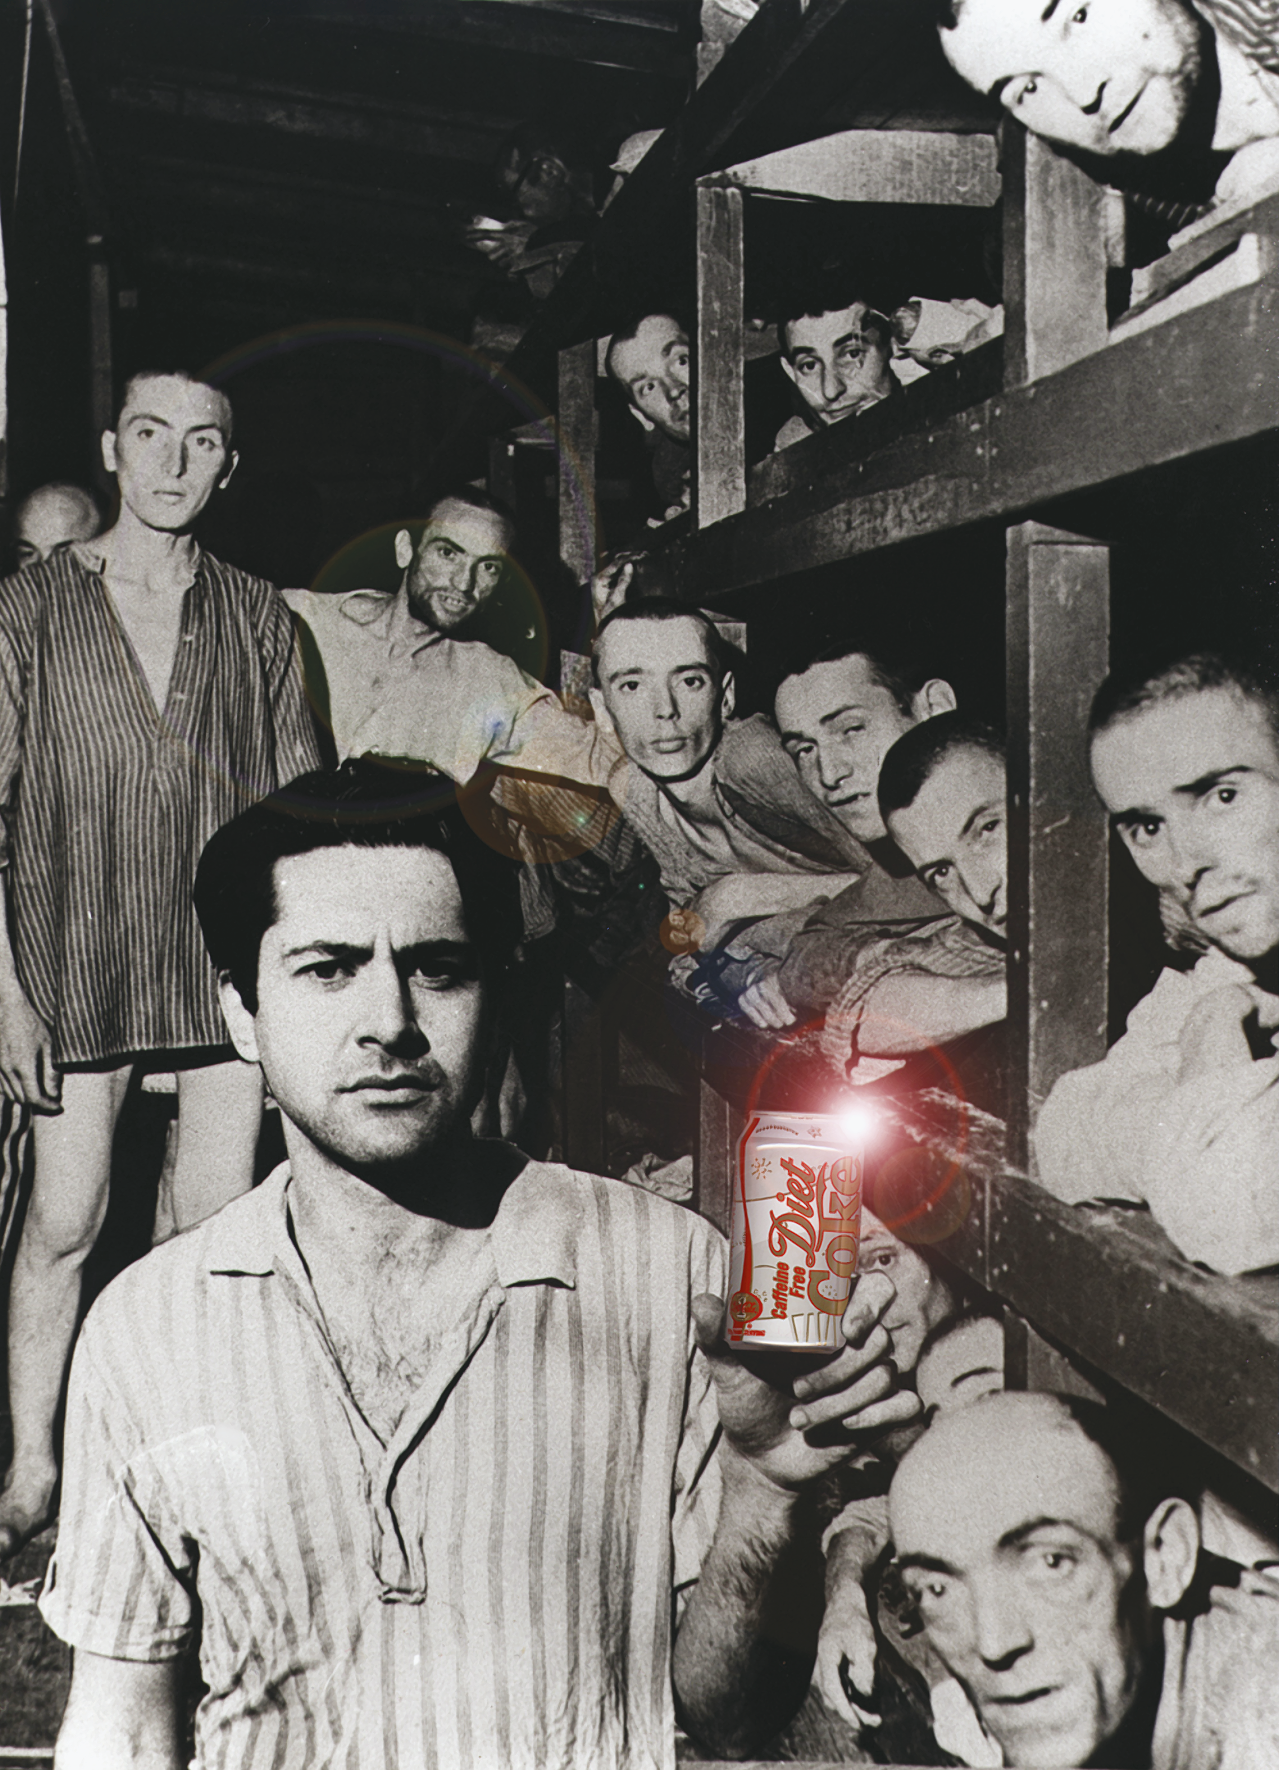 Photograph of men standing and sitting in bunks wearing striped shirts and looking at camera. The one closest to the camera holds a Diet Coke. 